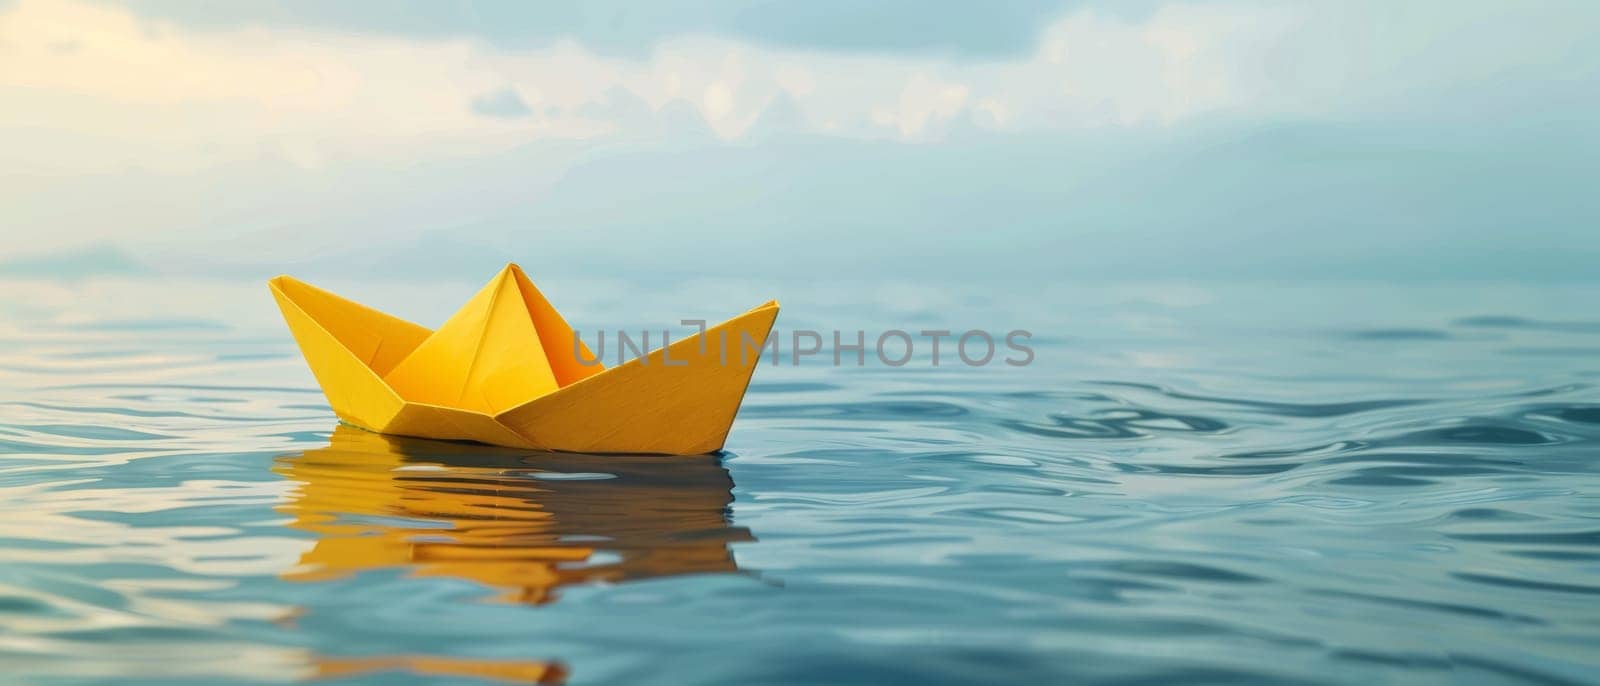 A vibrant yellow origami boat floats peacefully on a calm blue water surface, reflecting its bright color. by sfinks